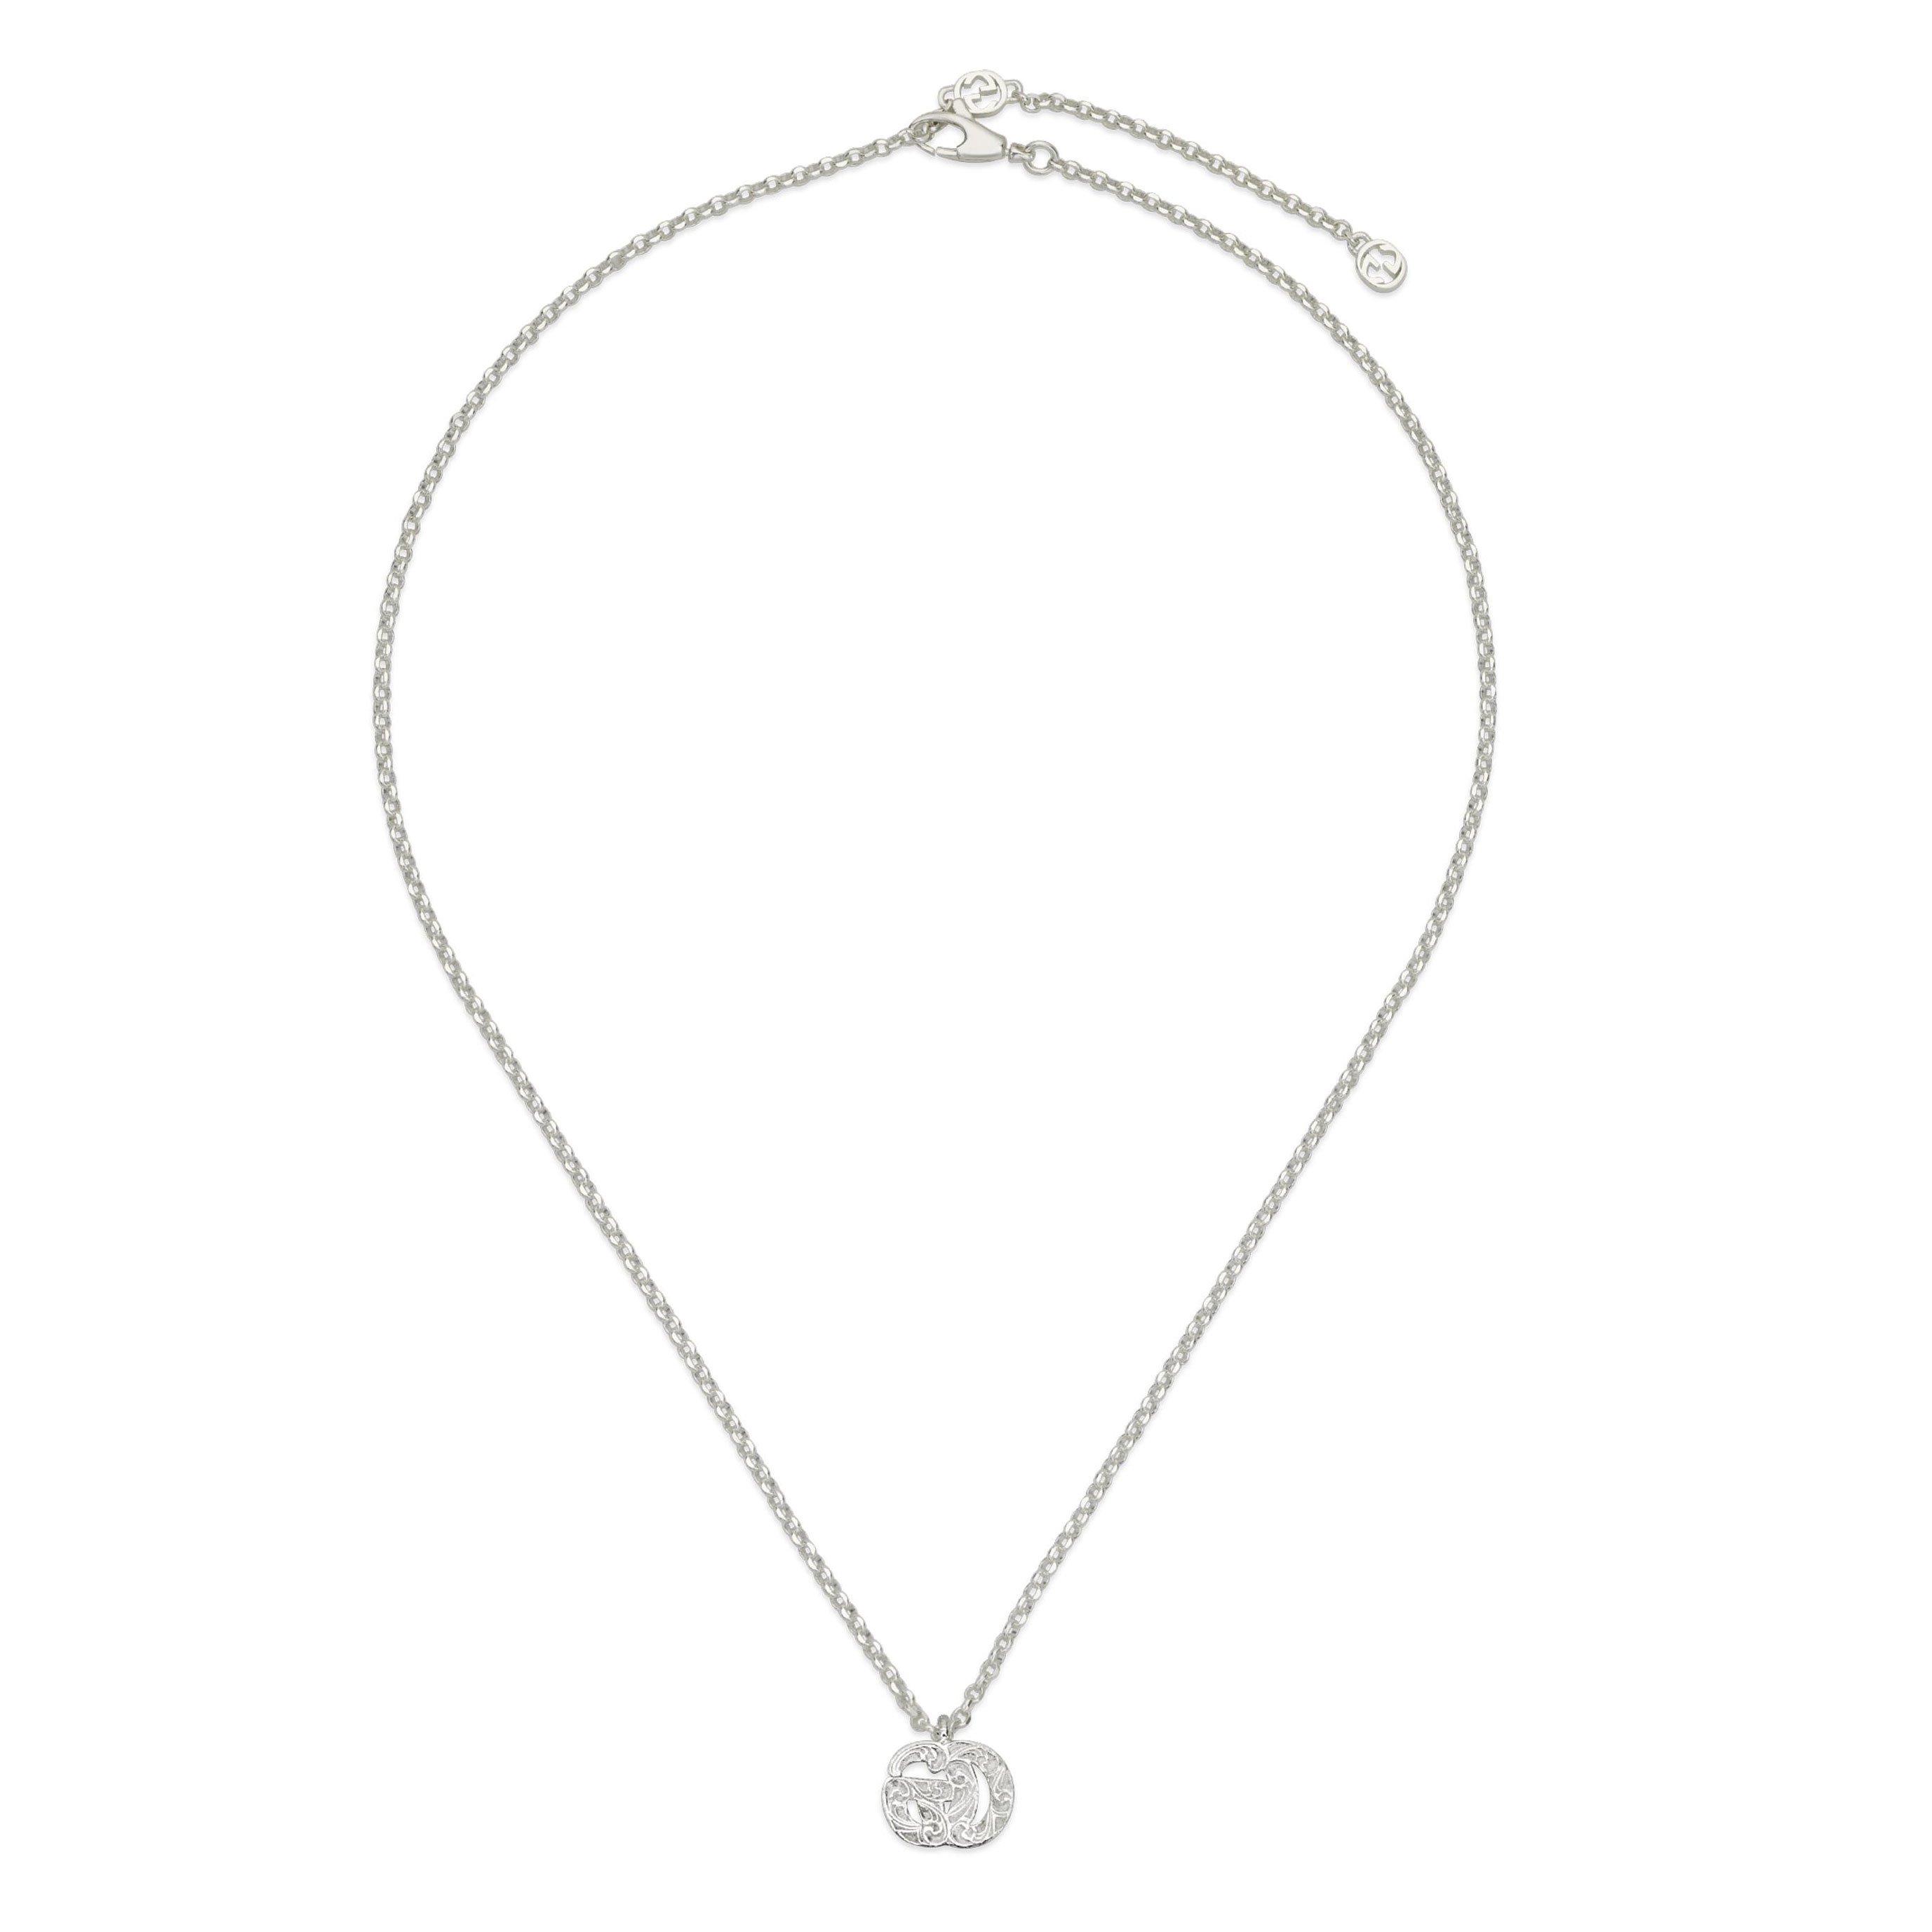 Gucci GG Marmont Silver Pendant | 0137748 | Beaverbrooks the Jewellers